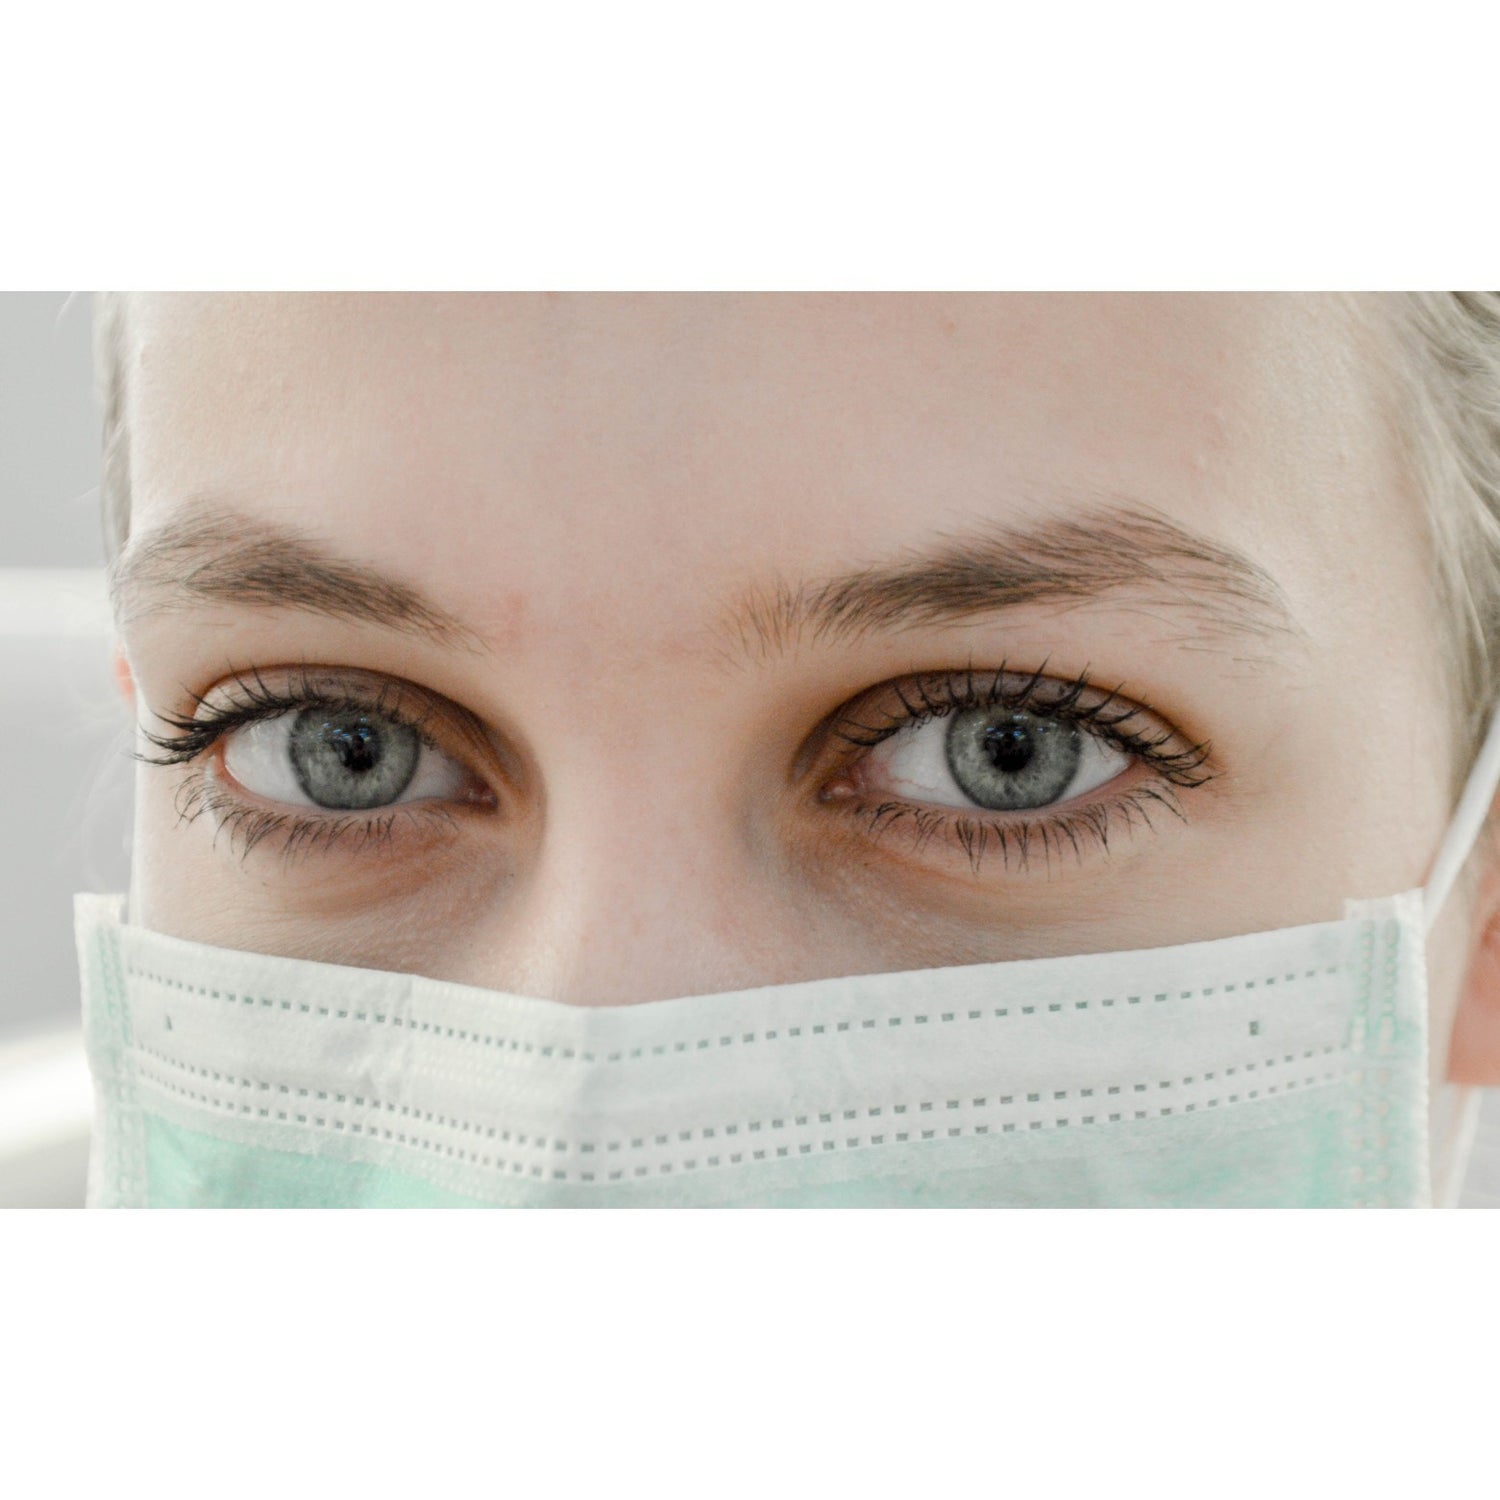 Surgical Masks Medical use type IIR